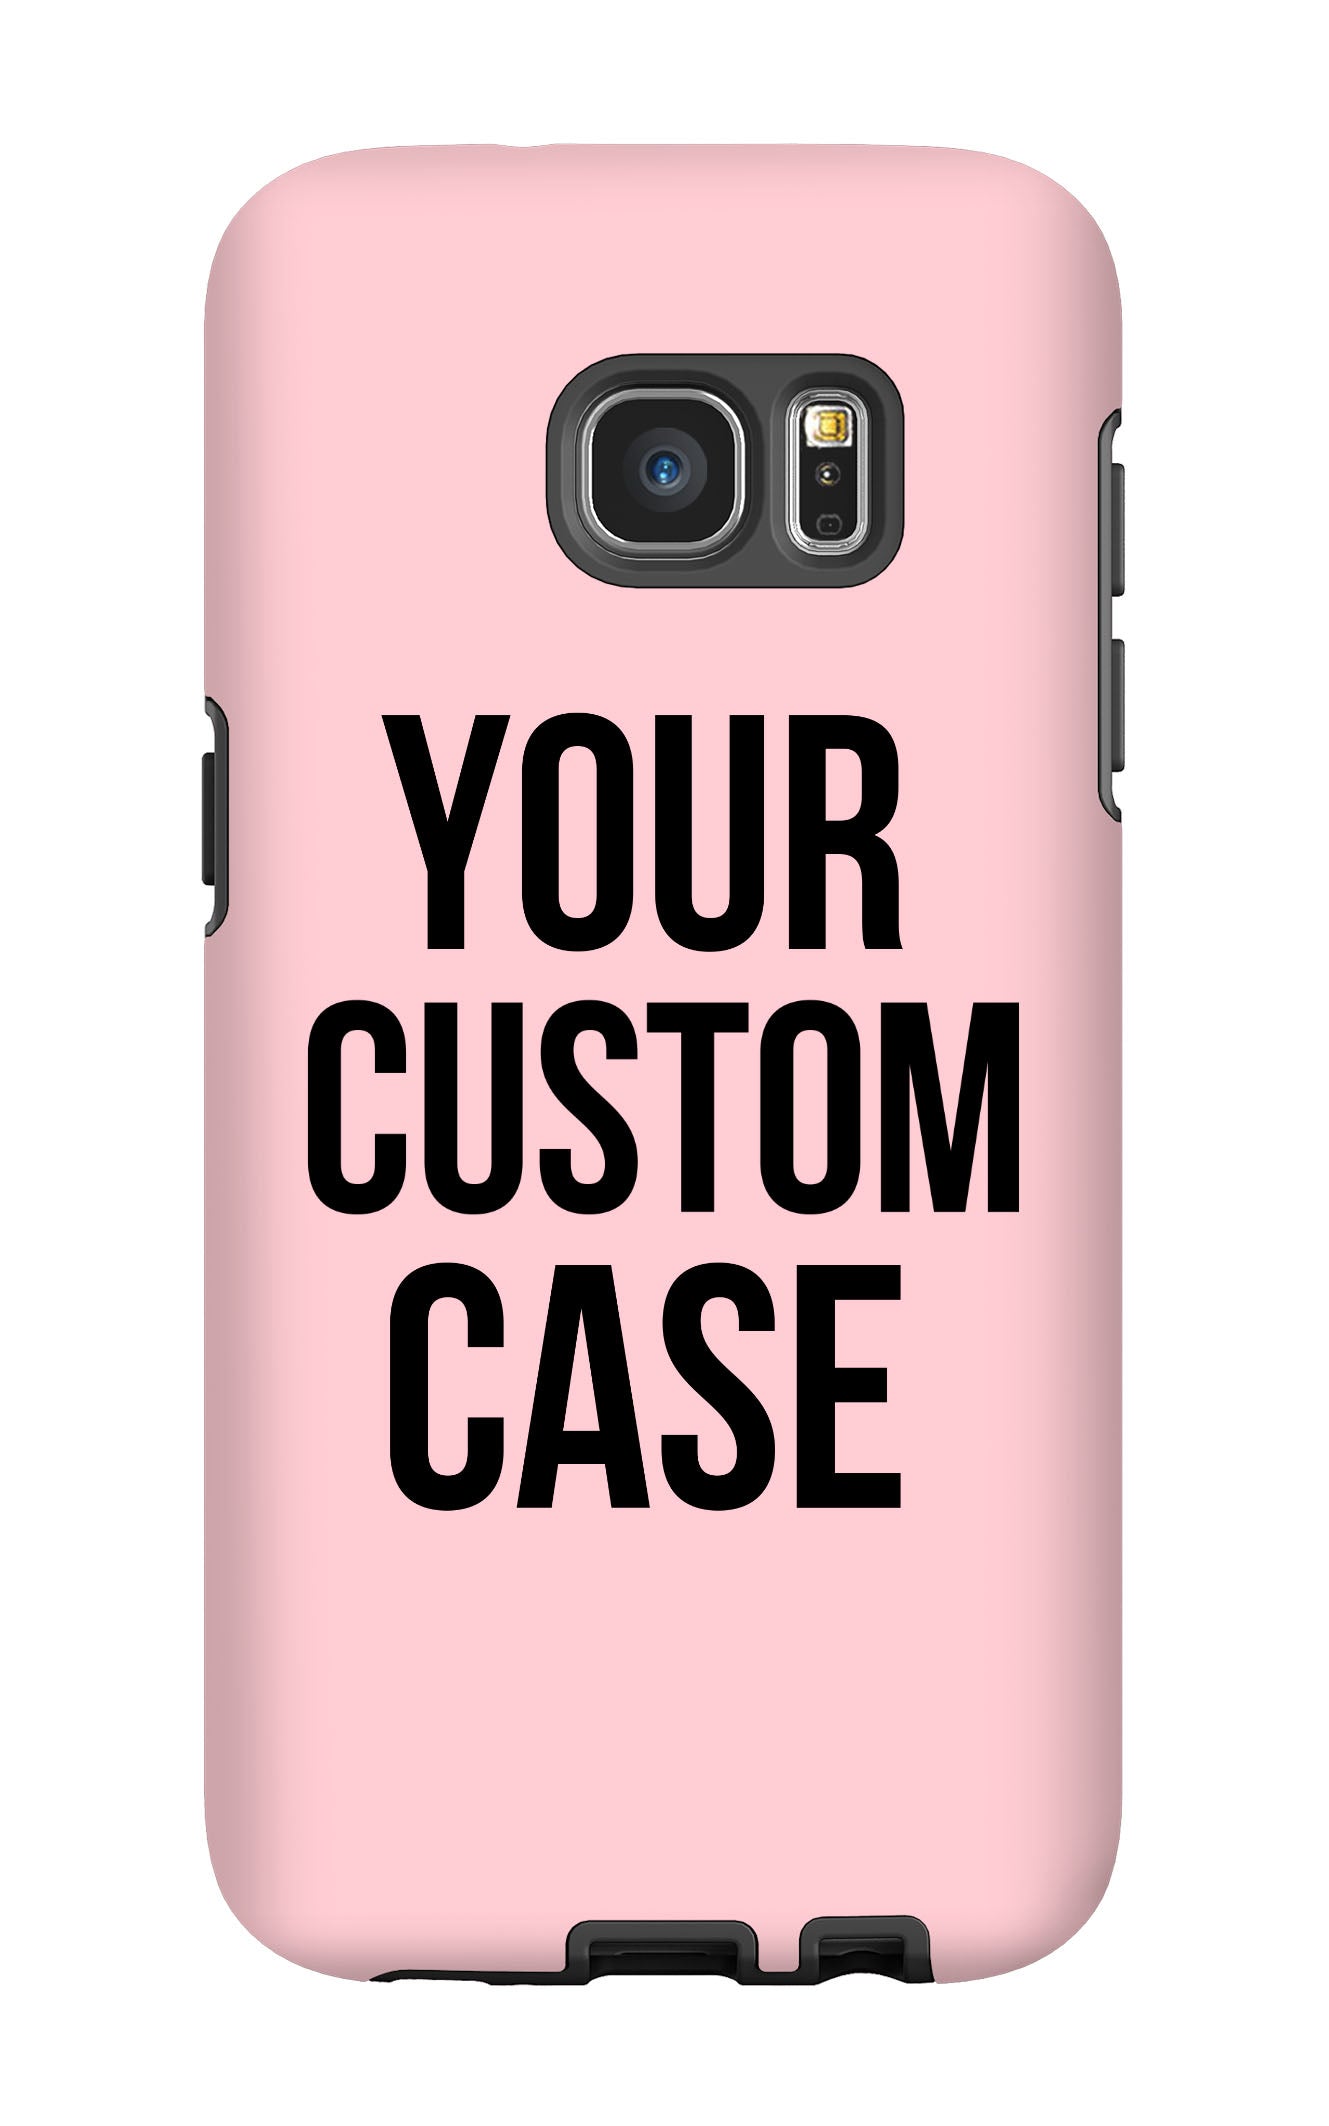 Custom Galaxy S7 Edge Extra Protective Bumper Case - Your Custom Design in Cart will be Shipped - Pixly Case